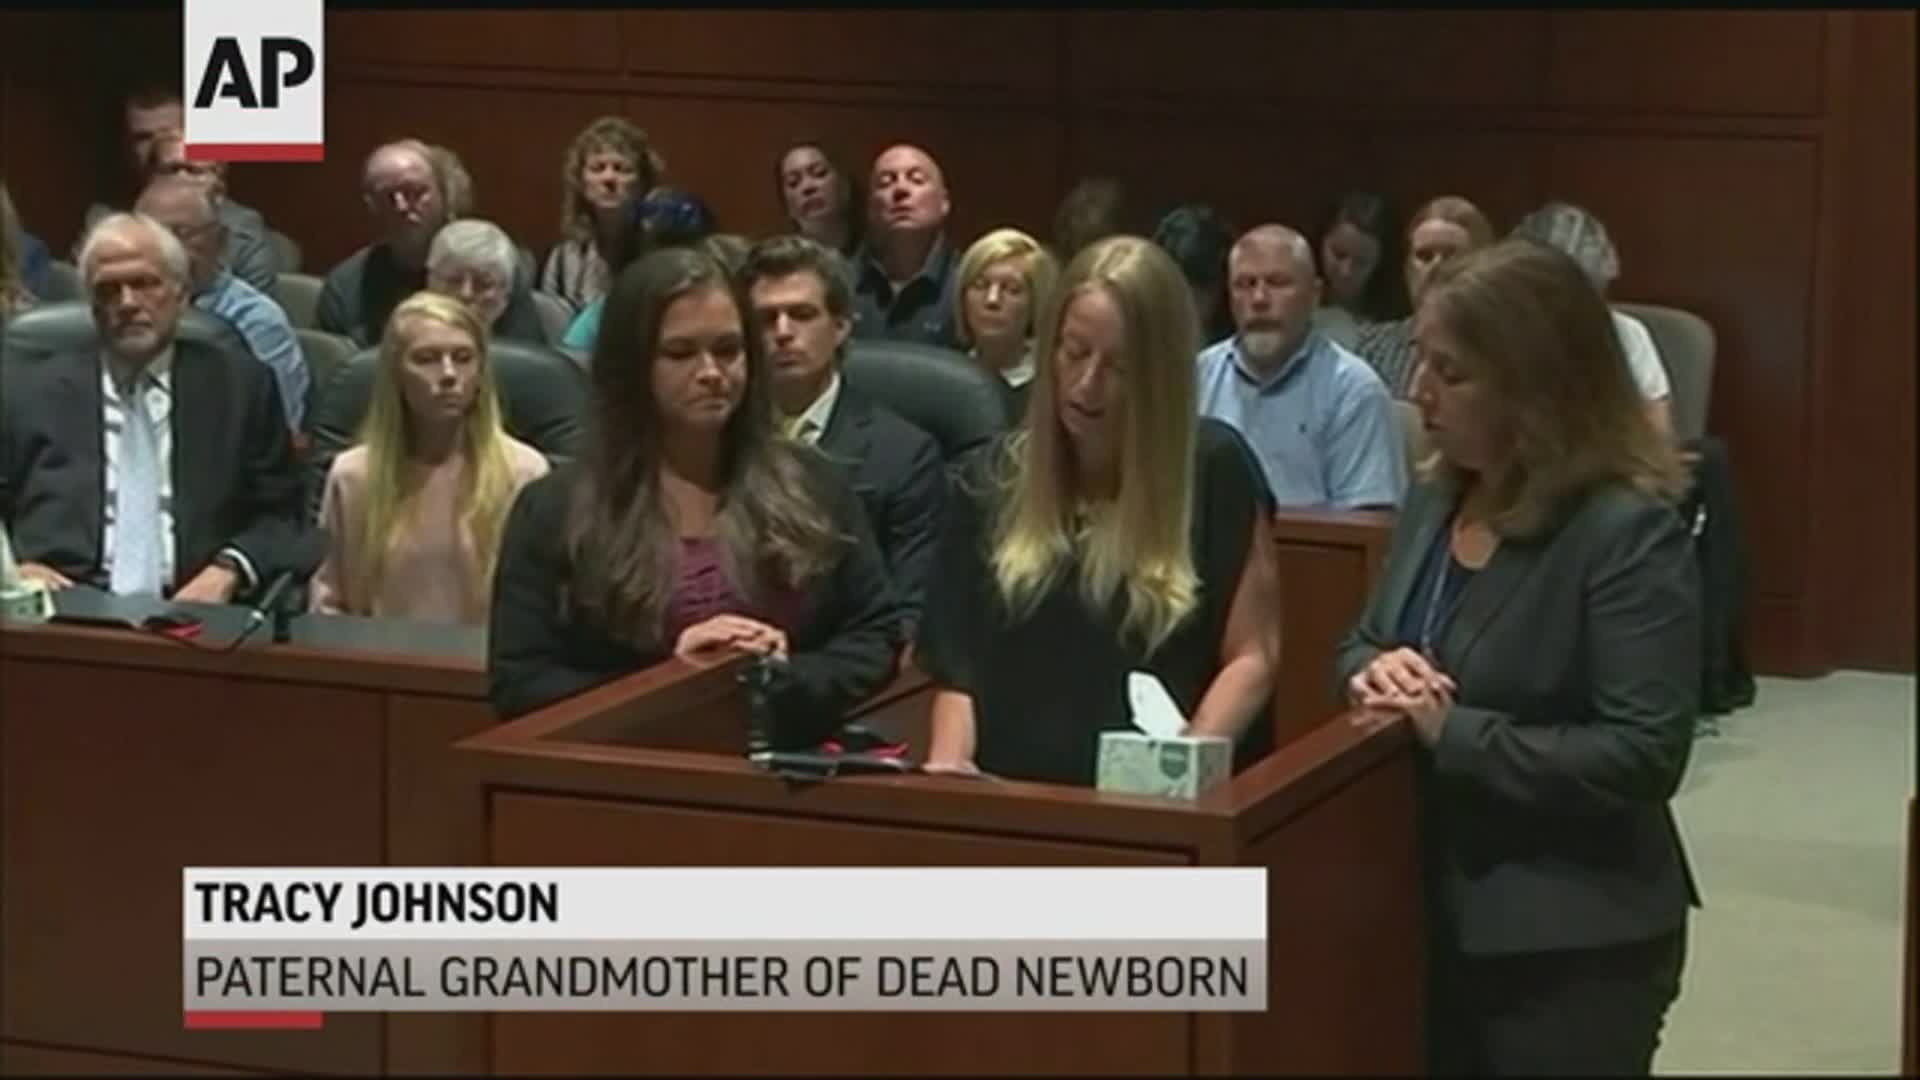 Ohio mom gets 3 years probation for corpse abuse